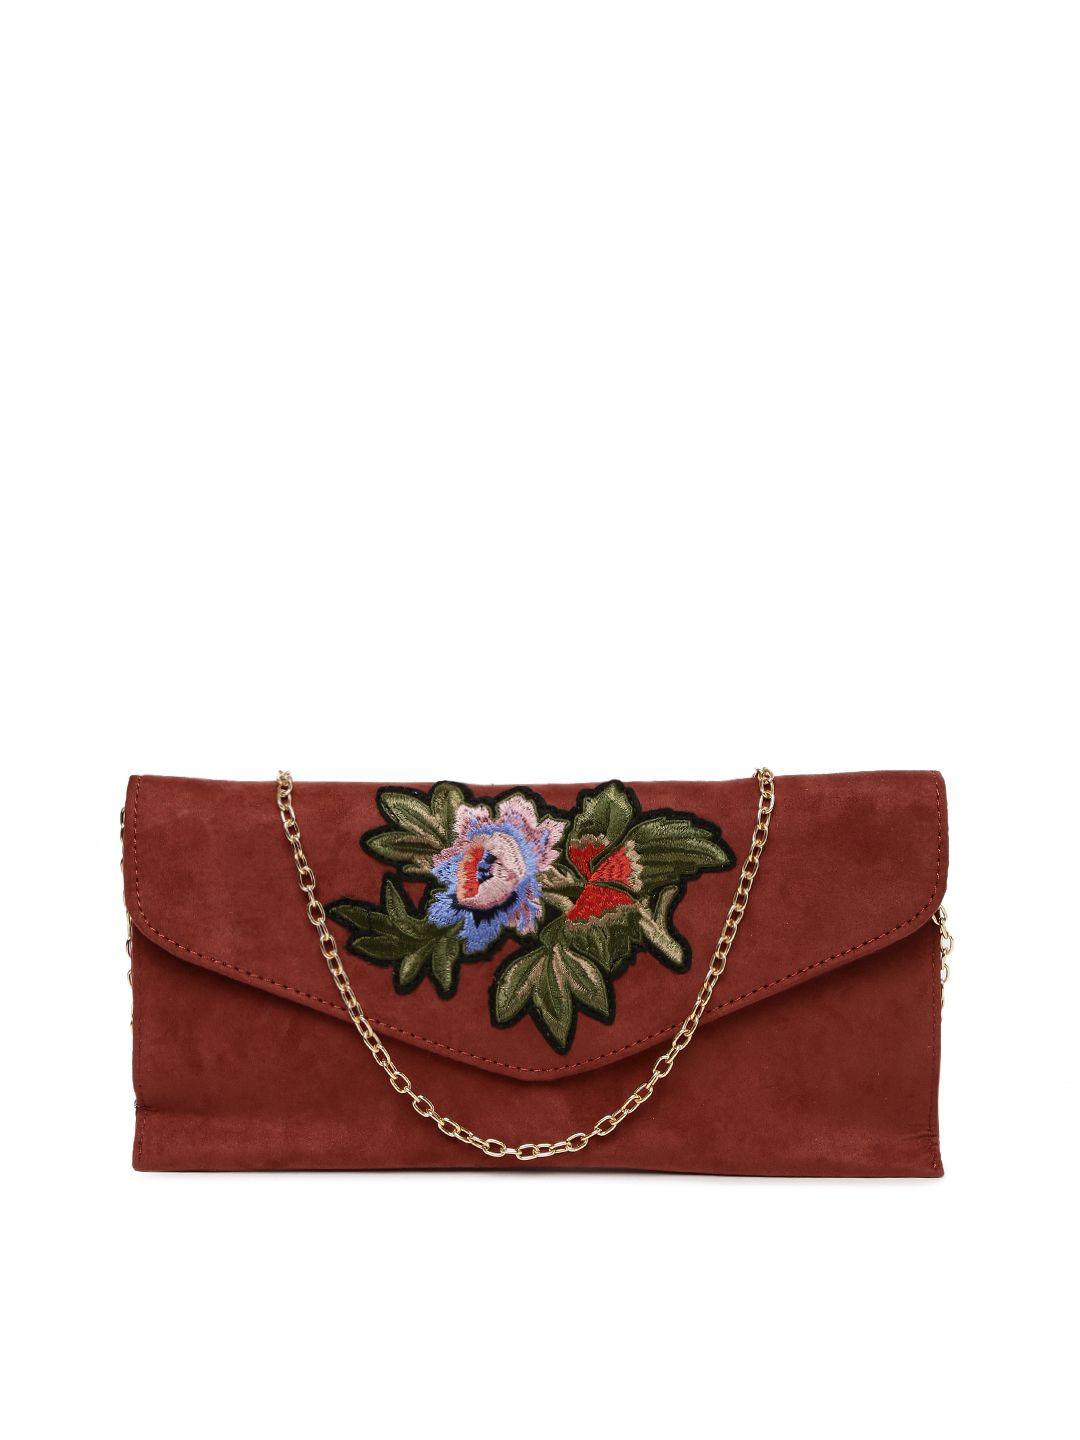 toniq maroon winter rose embroidered envelope clutch